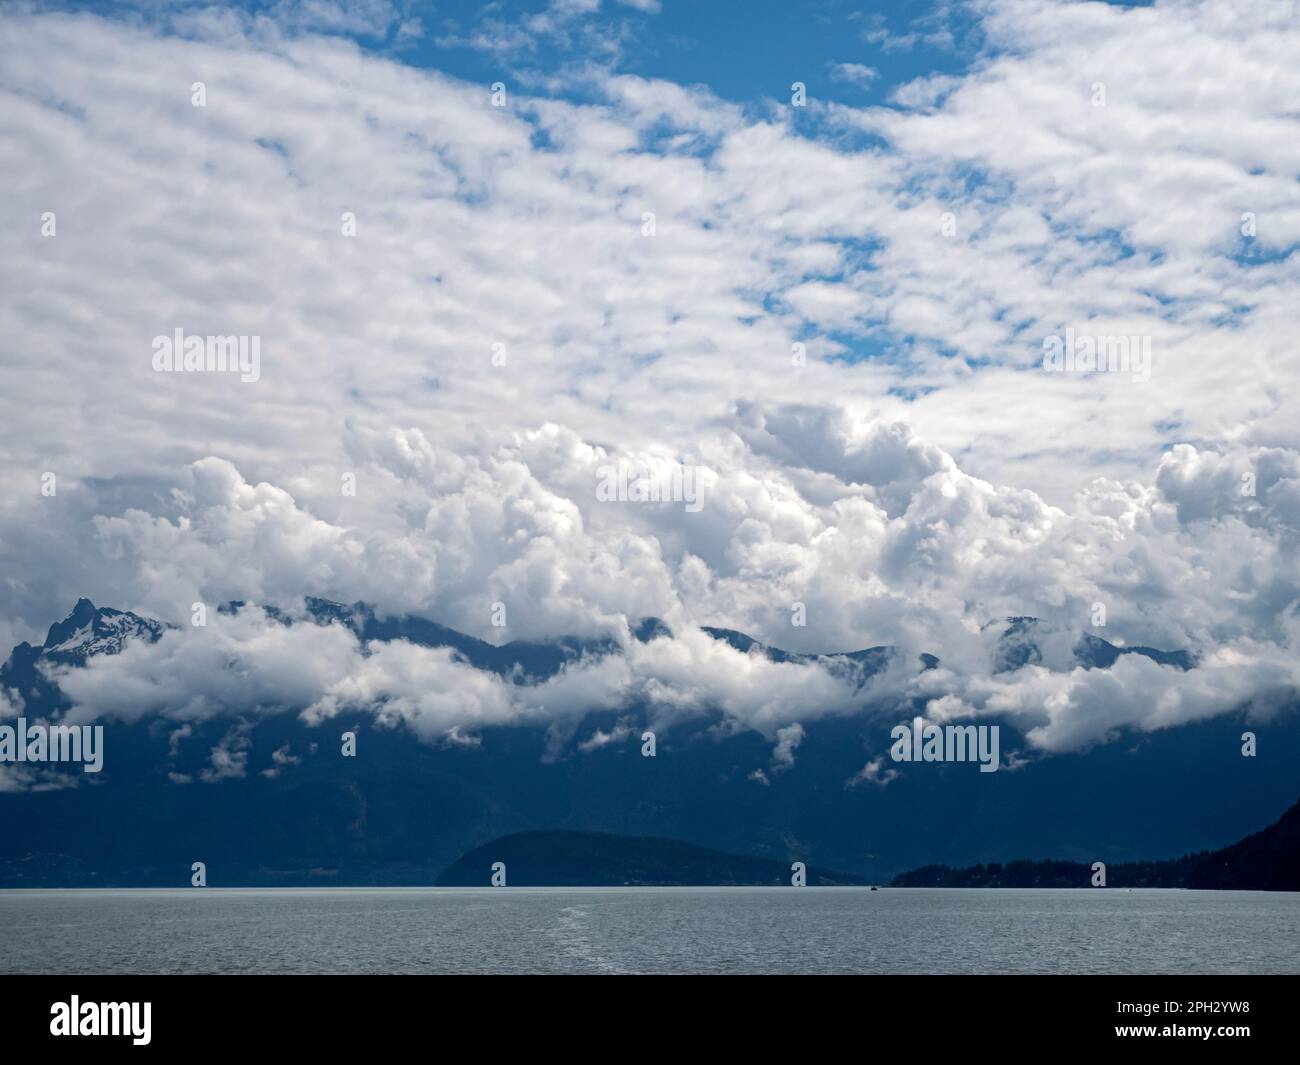 BC00746-00...BRITISH COLUMBIA - Clouds over the Coast Range from the Strait of Georgia. Stock Photo